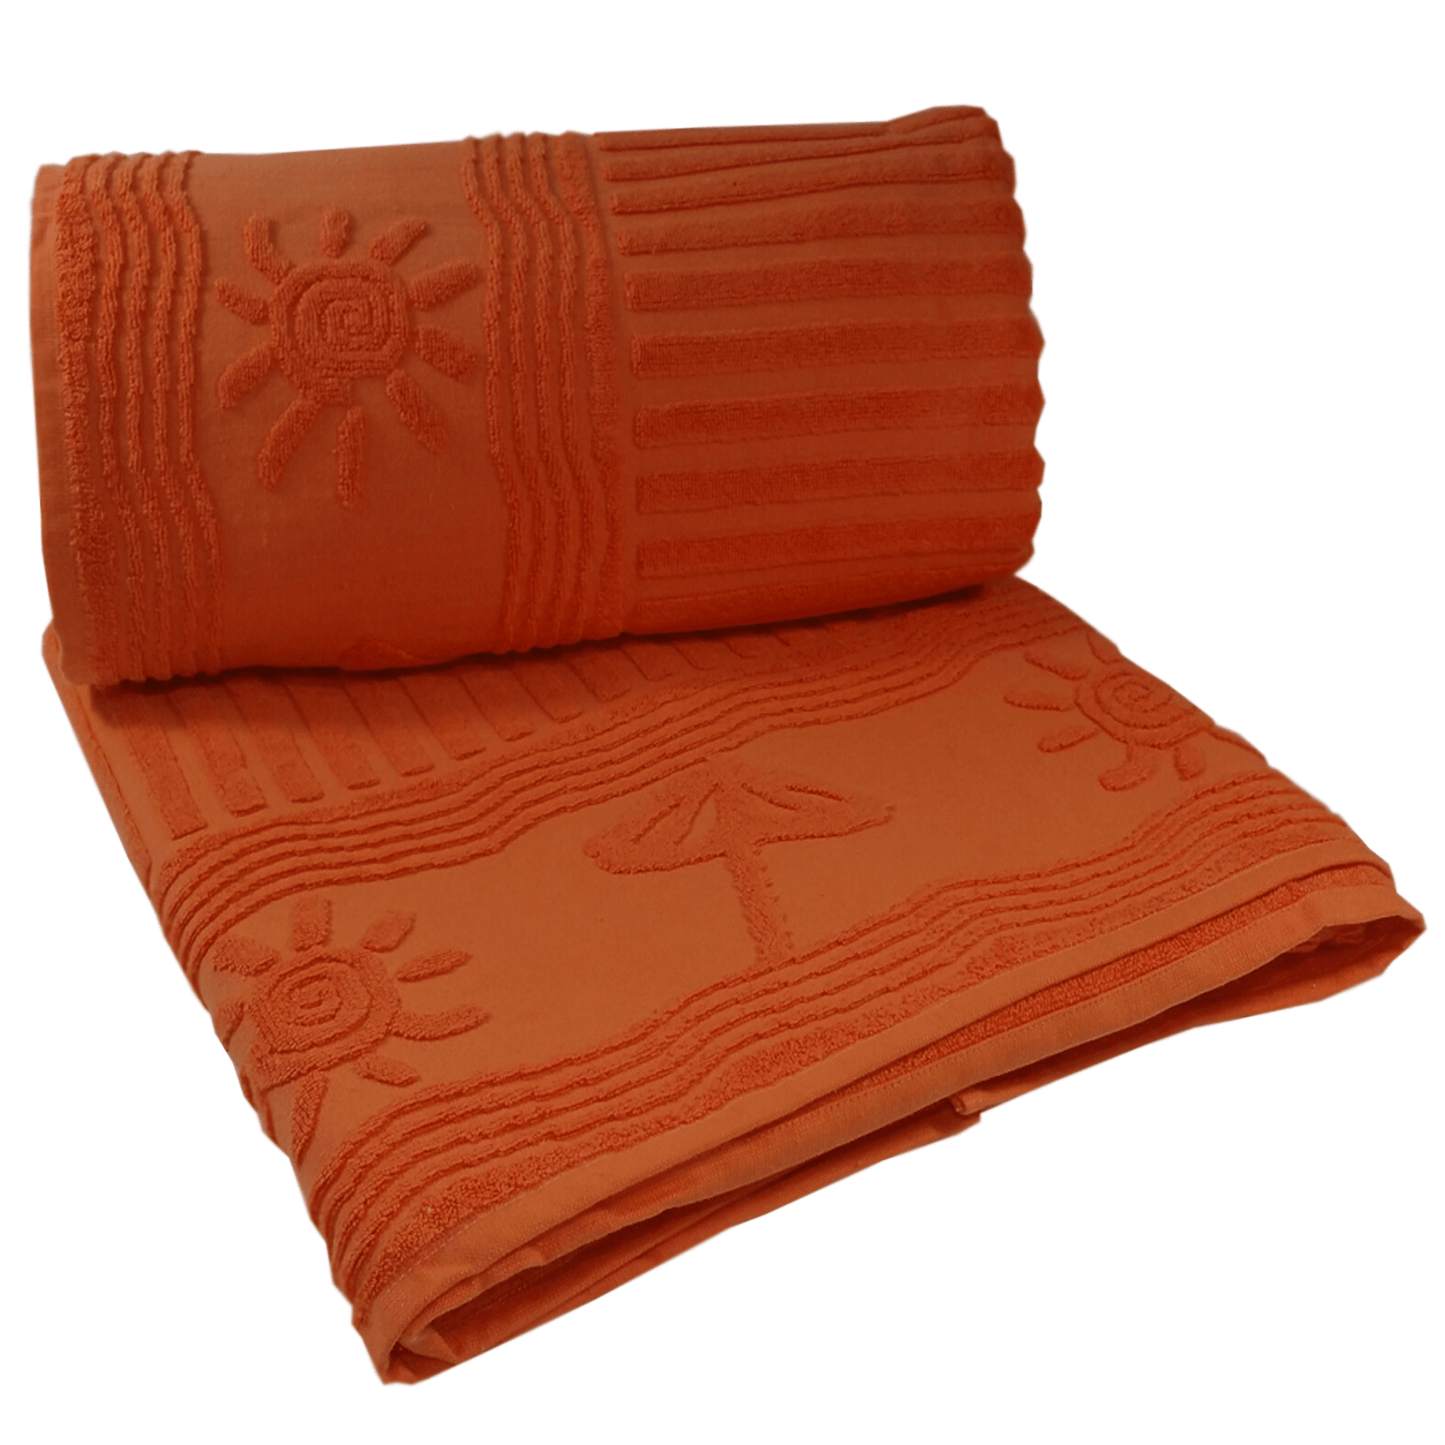 extra large beach towels great corporate gift orange